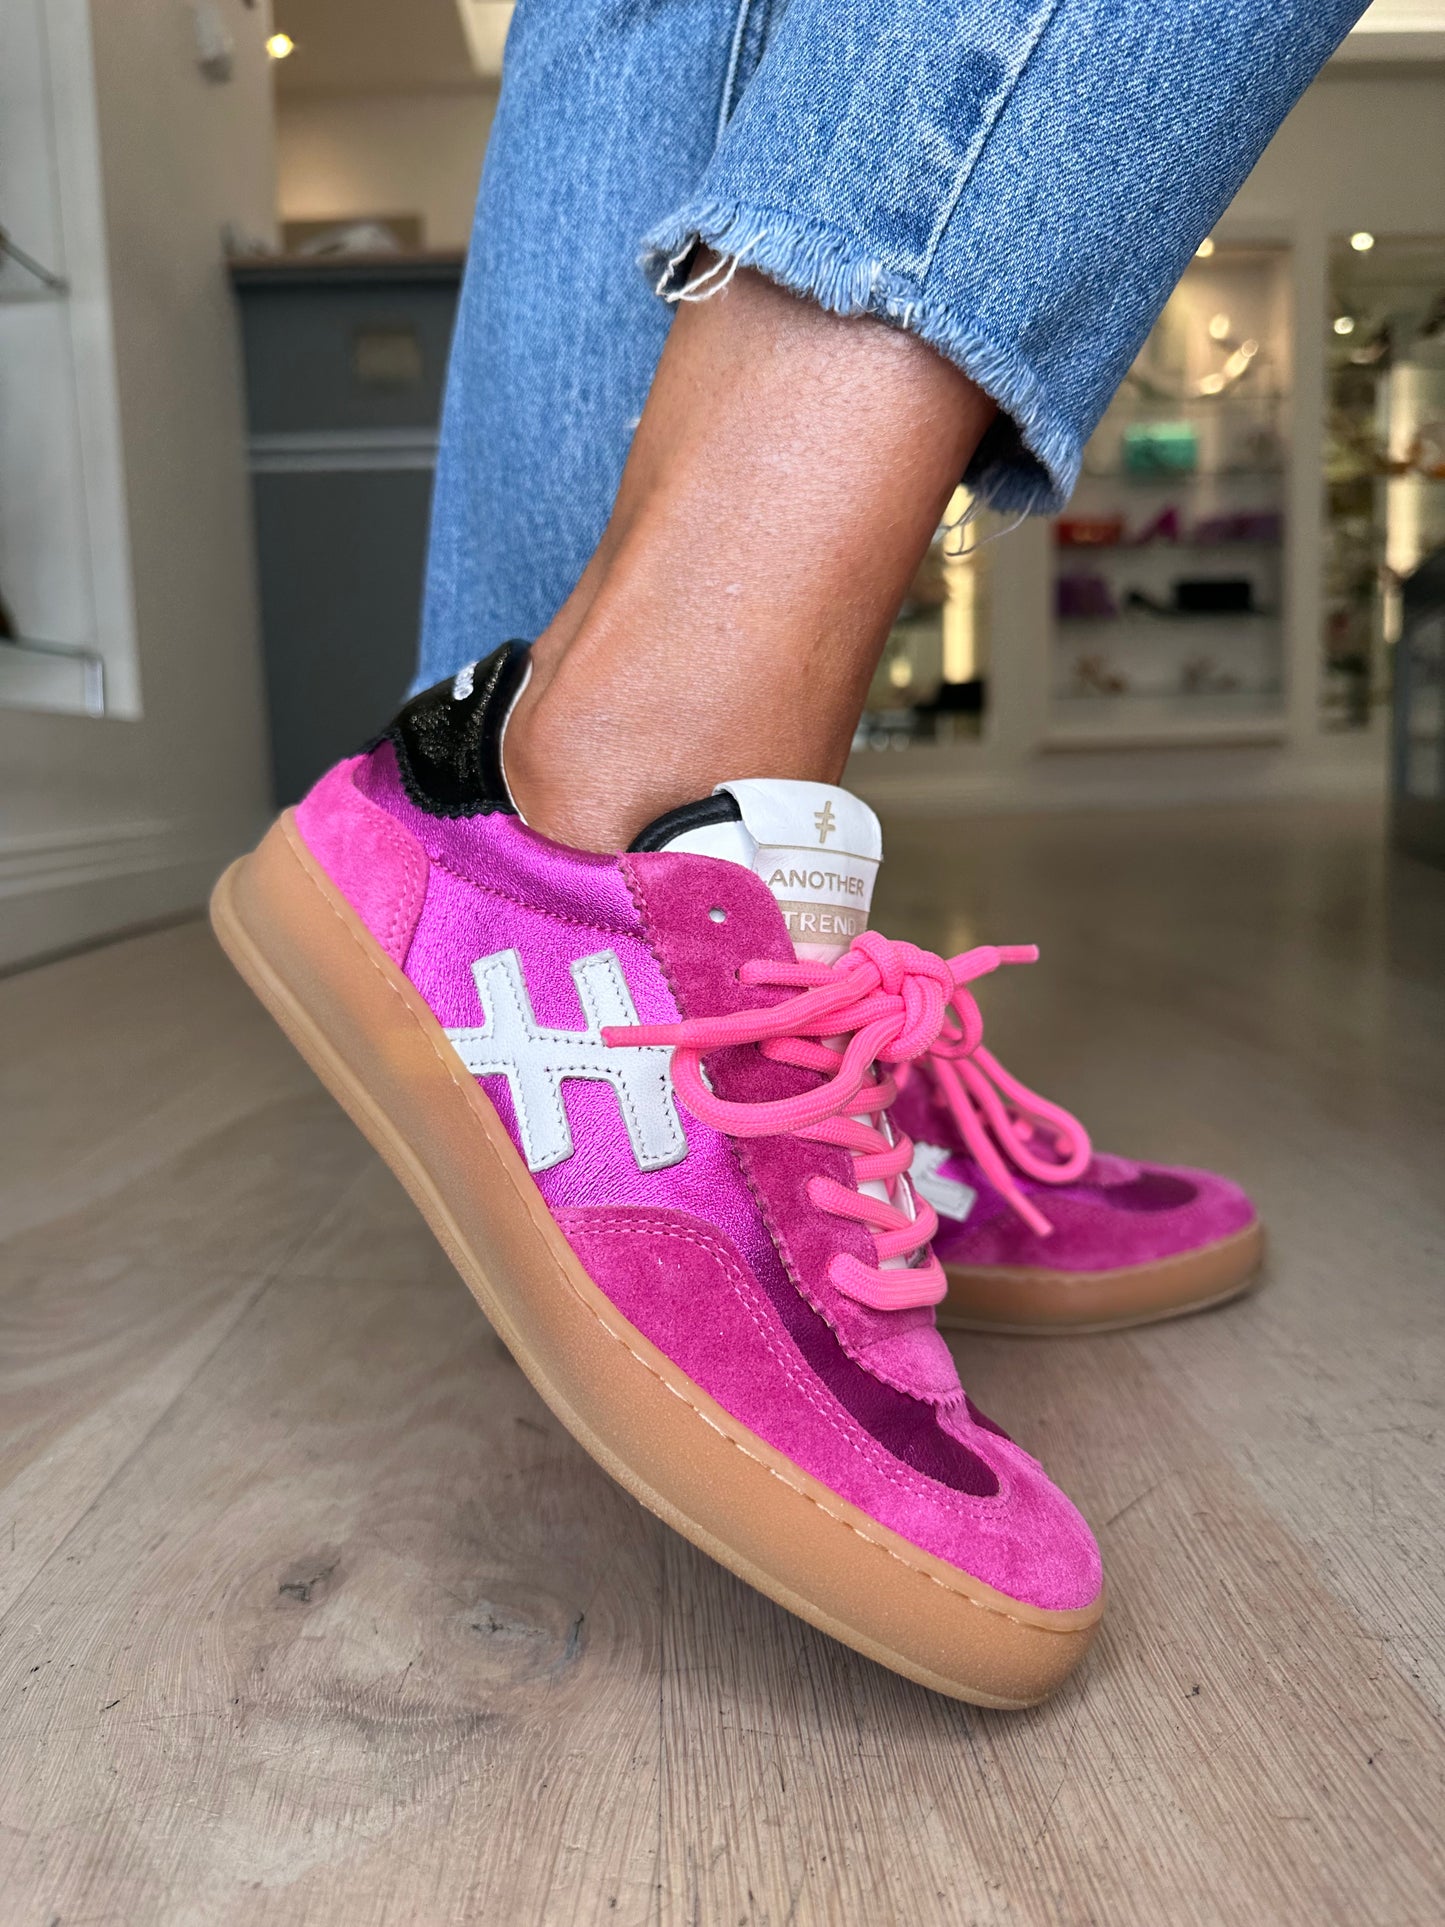 Alpe (Another Trend) - Hot Pink Suede/Metallic Trainer